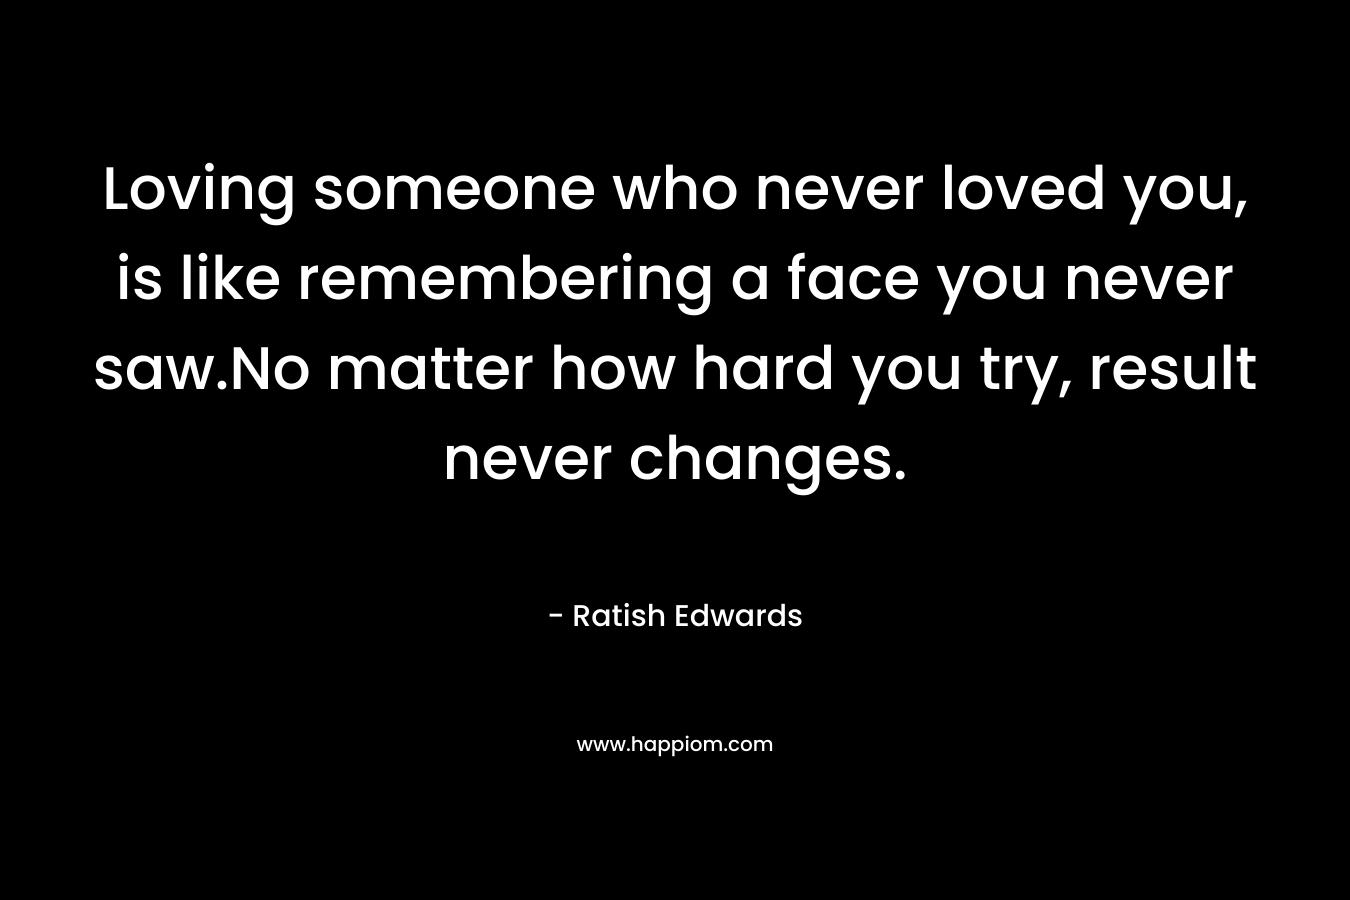 Loving someone who never loved you, is like remembering a face you never saw.No matter how hard you try, result never changes. – Ratish Edwards